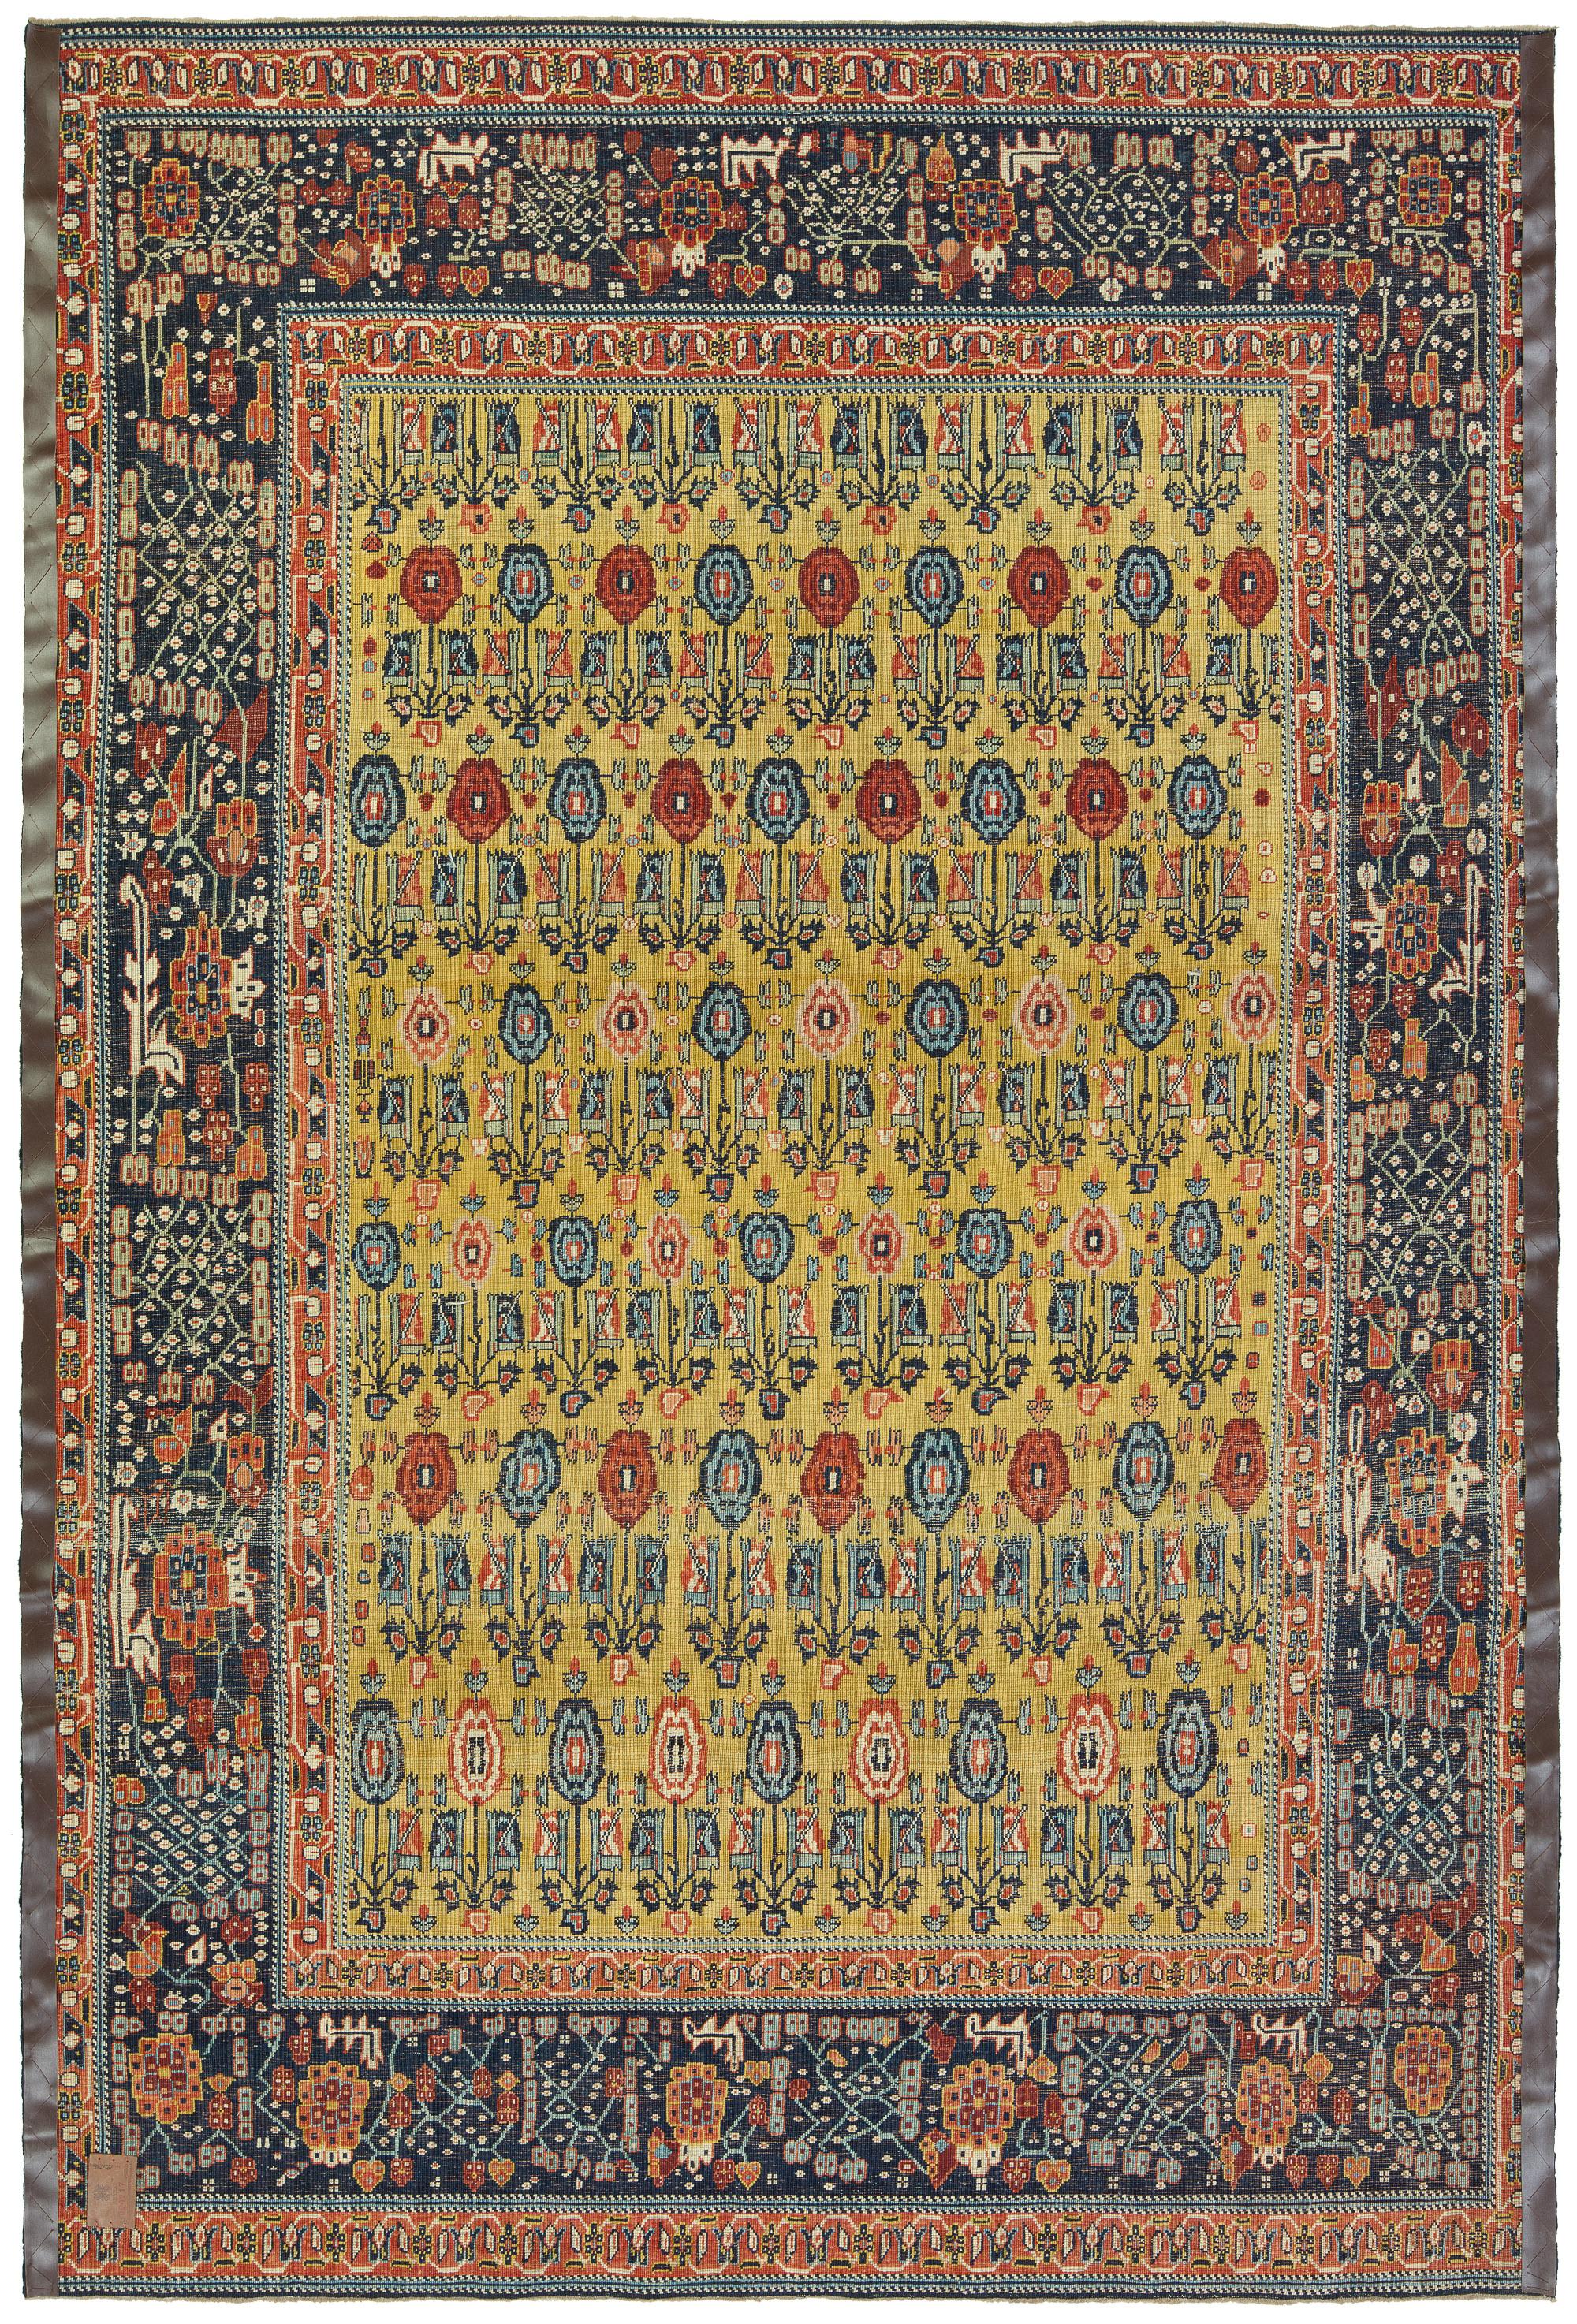 The source of the rug comes from the book Antique Rugs of Kurdistan A Historical Legacy of Woven Art, James D. Burns, 2002 nr.28. This was an exclusive example of offset rows of flowers designed for 18th-century rug from Senna, Eastern Kurdistan